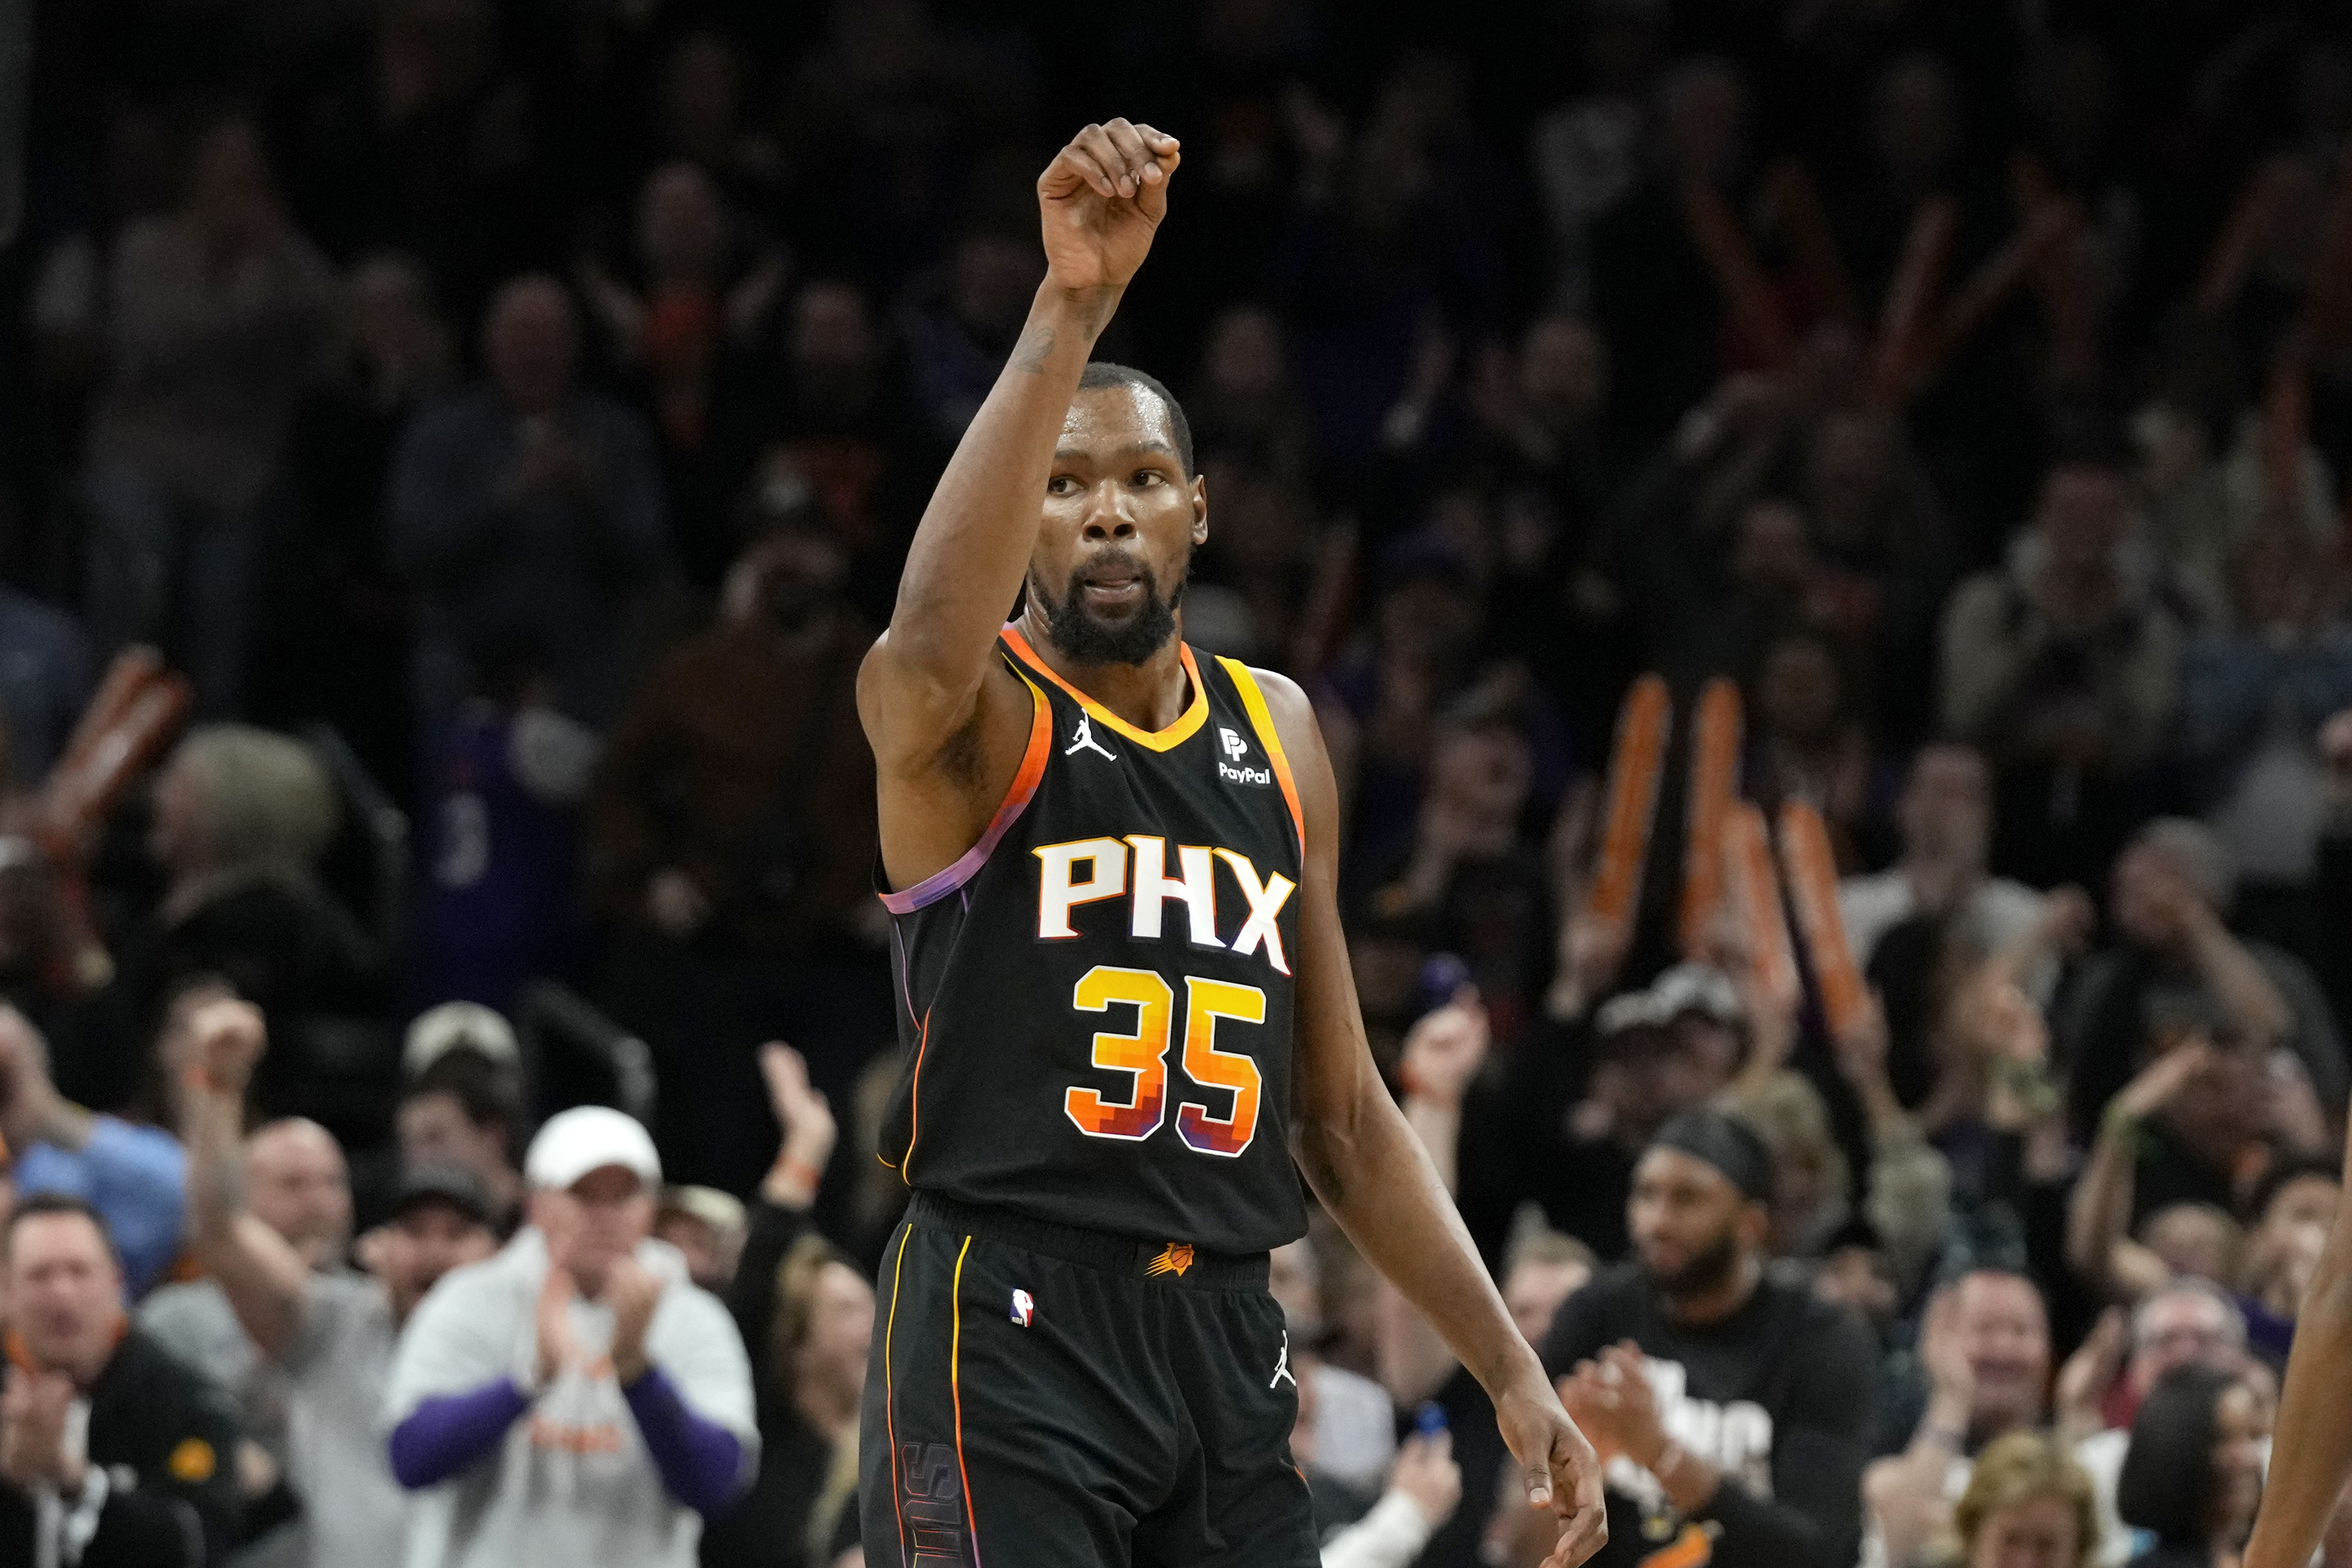 Kevin Durant scored just 4 points in 4th quarter of Suns' last 3 games